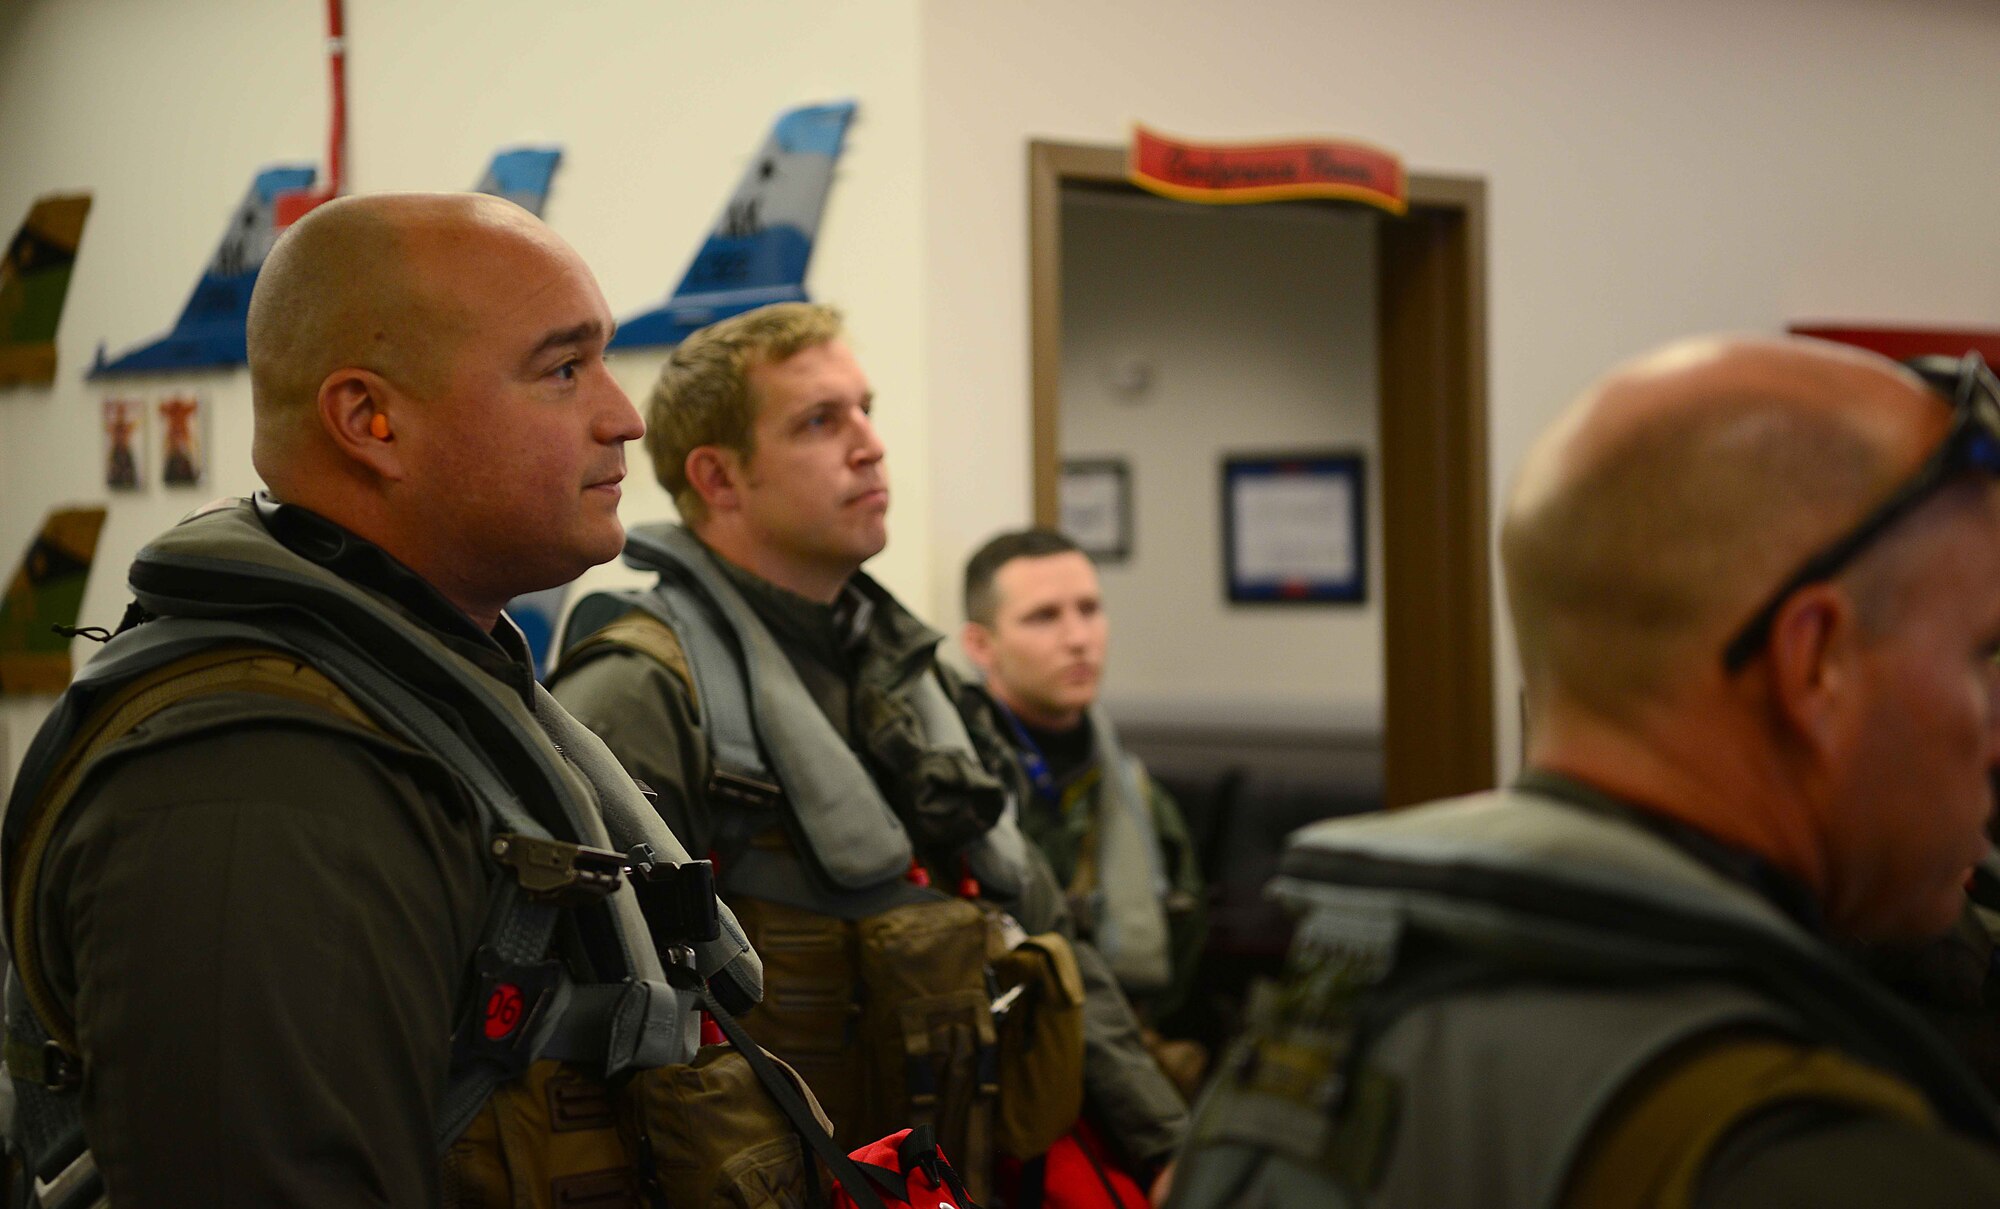 U.S. Air Force F-16 Fighting Falcon pilots, assigned to the 18th Aggressor Squadron, receive a pre-flight brief before departing to support exercise Valiant Shield on Eielson Air Force Base (AFB), Alaska, Sept. 8, 2020. The 18th AGRS will be participating in exercise Valiant Shield from Sept. 8-20 at Anderson AFB, Guam. Valiant Shield 20 provides an effective, flexible and capabilities centered force, enabling real-world proficiency in response to a variety of crises. (U.S. Air Force photo by Staff Sgt. Sean Martin)